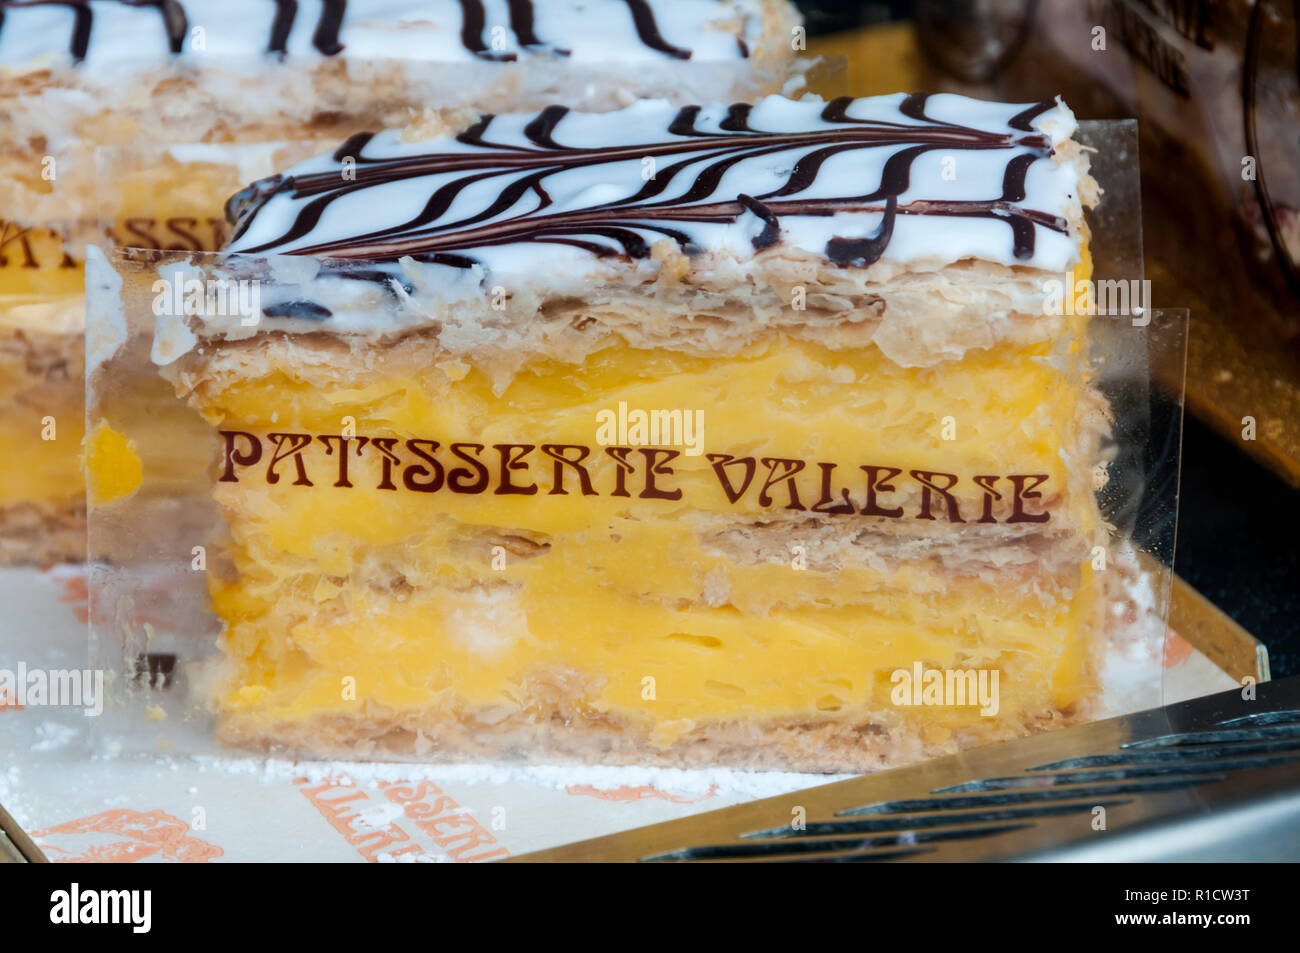 A cream slice in a shop window with the name of Patisserie Valerie on the wrapping. Stock Photo